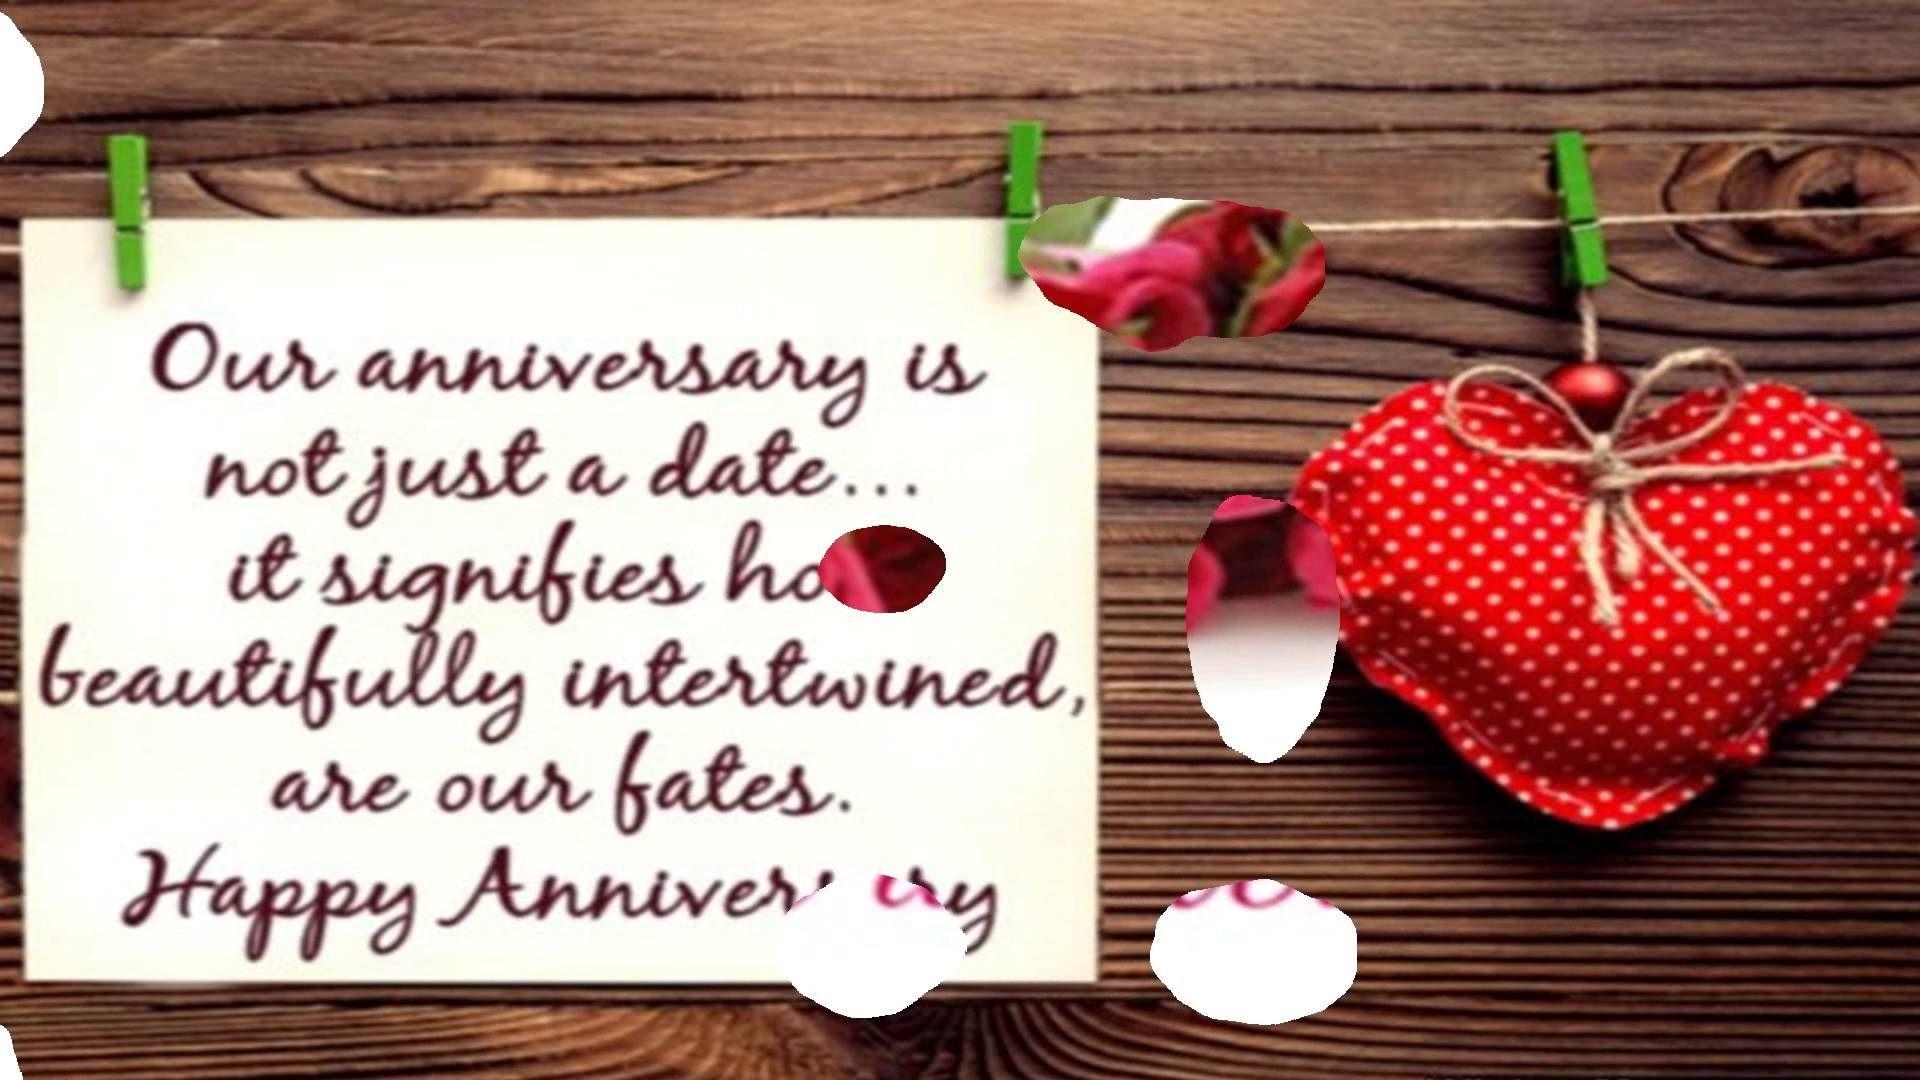 Happy marriage anniversary wishes to my friend HD wallpaper. HD